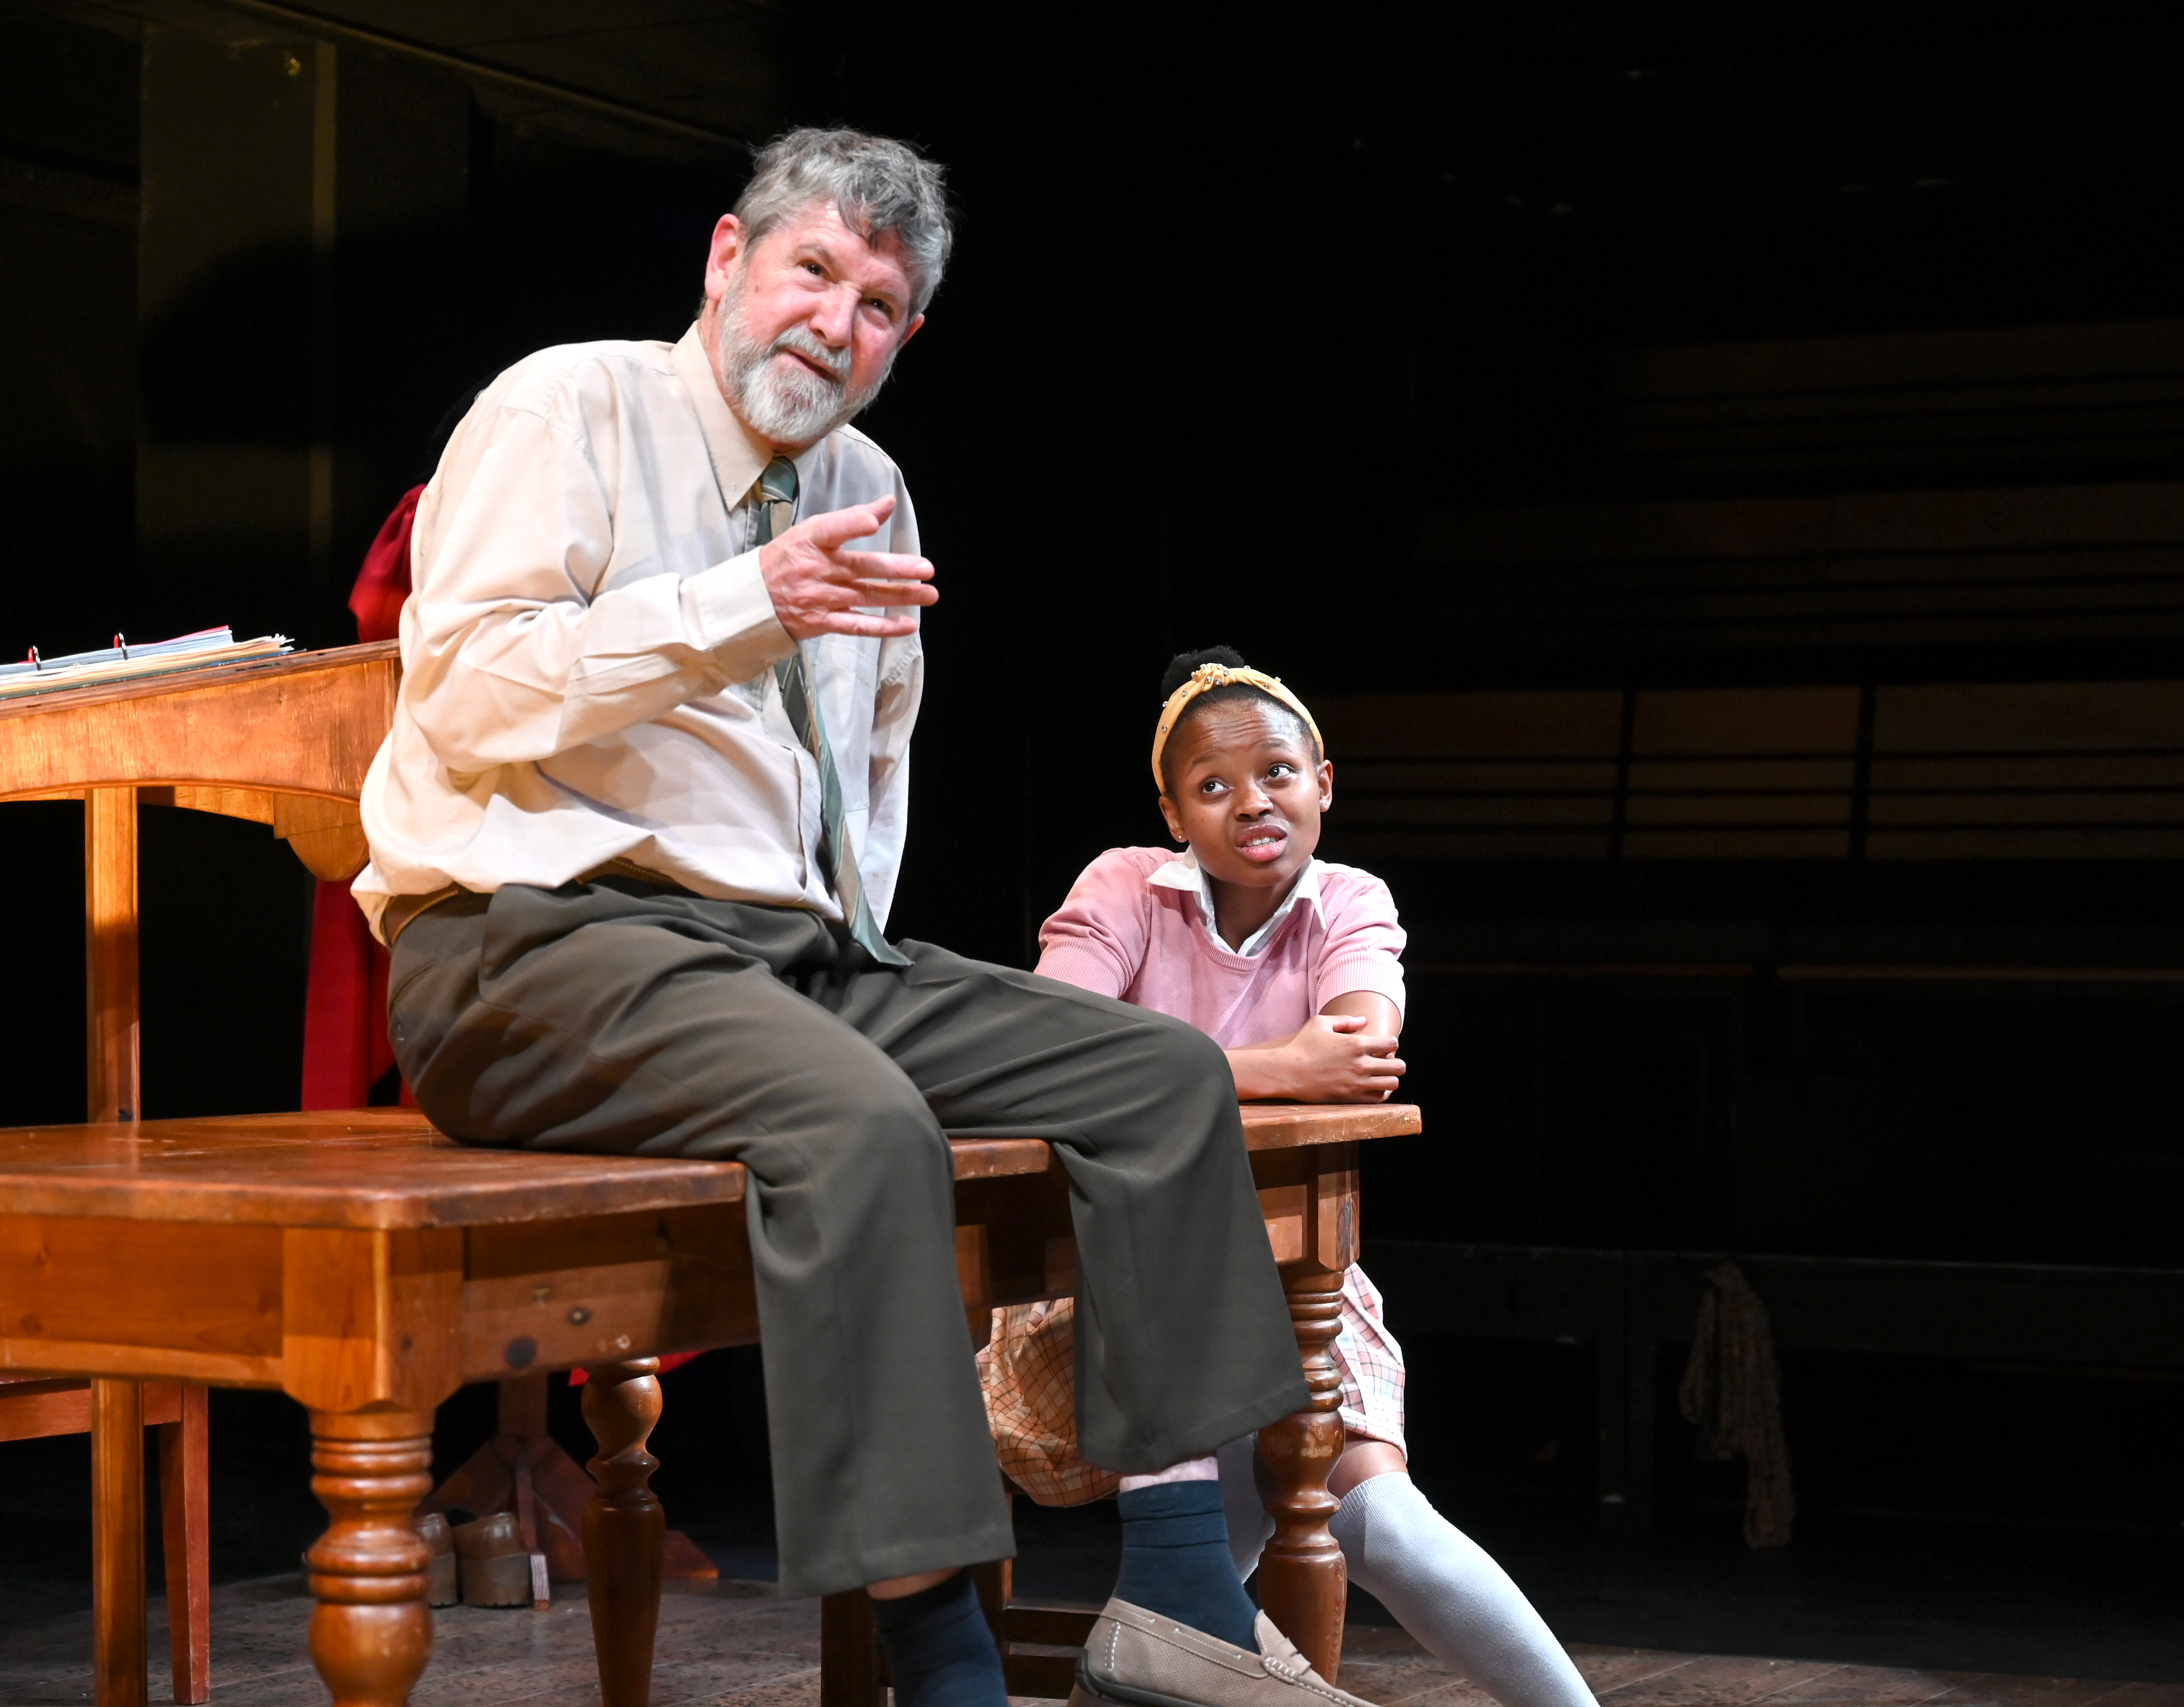 'The Lesson', written by Greg Homann starring Graham Hopkins and Lihle Ngubo. Image: Suzy Bernstein